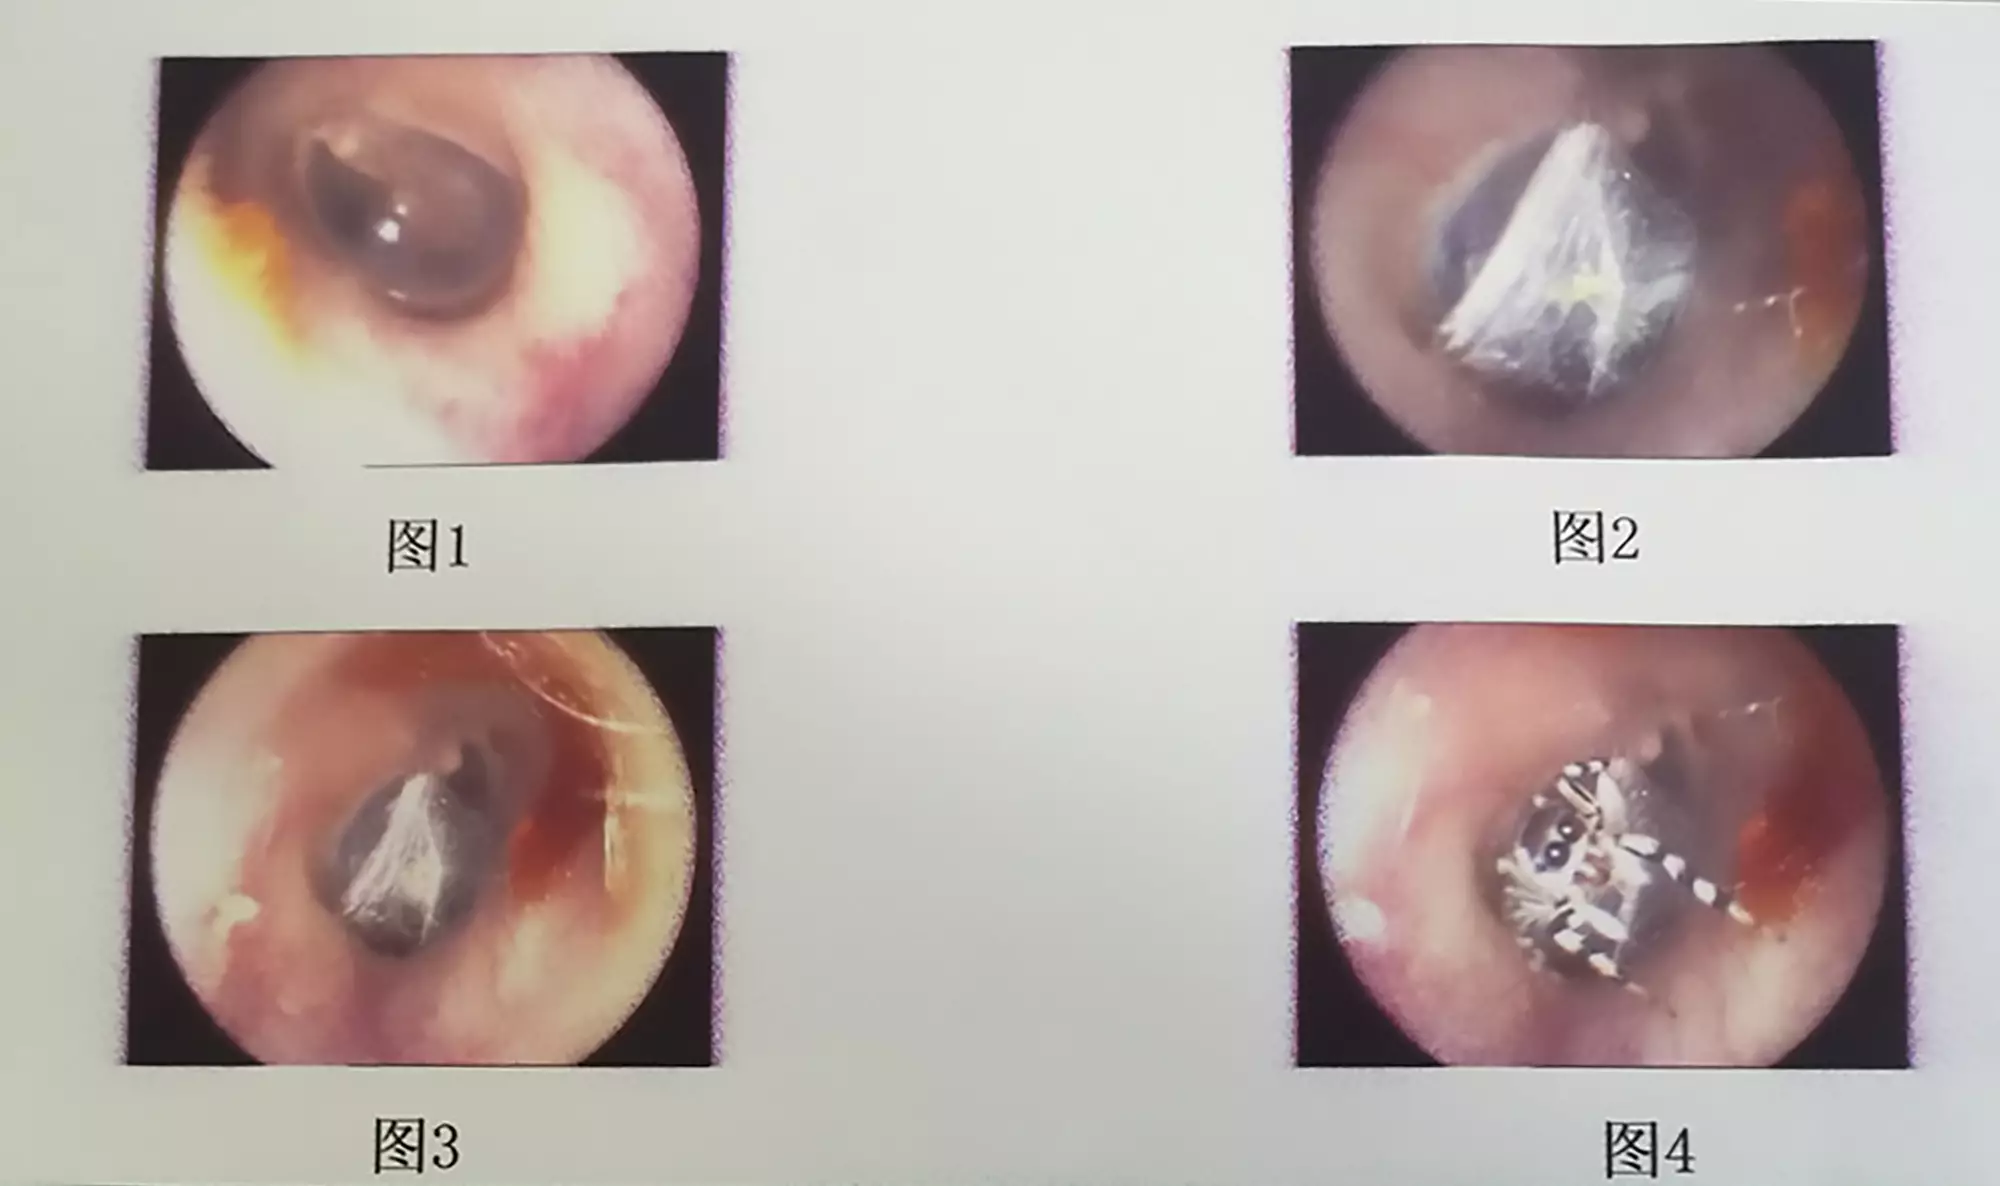 A spider and its web found inside the female patient's ear.